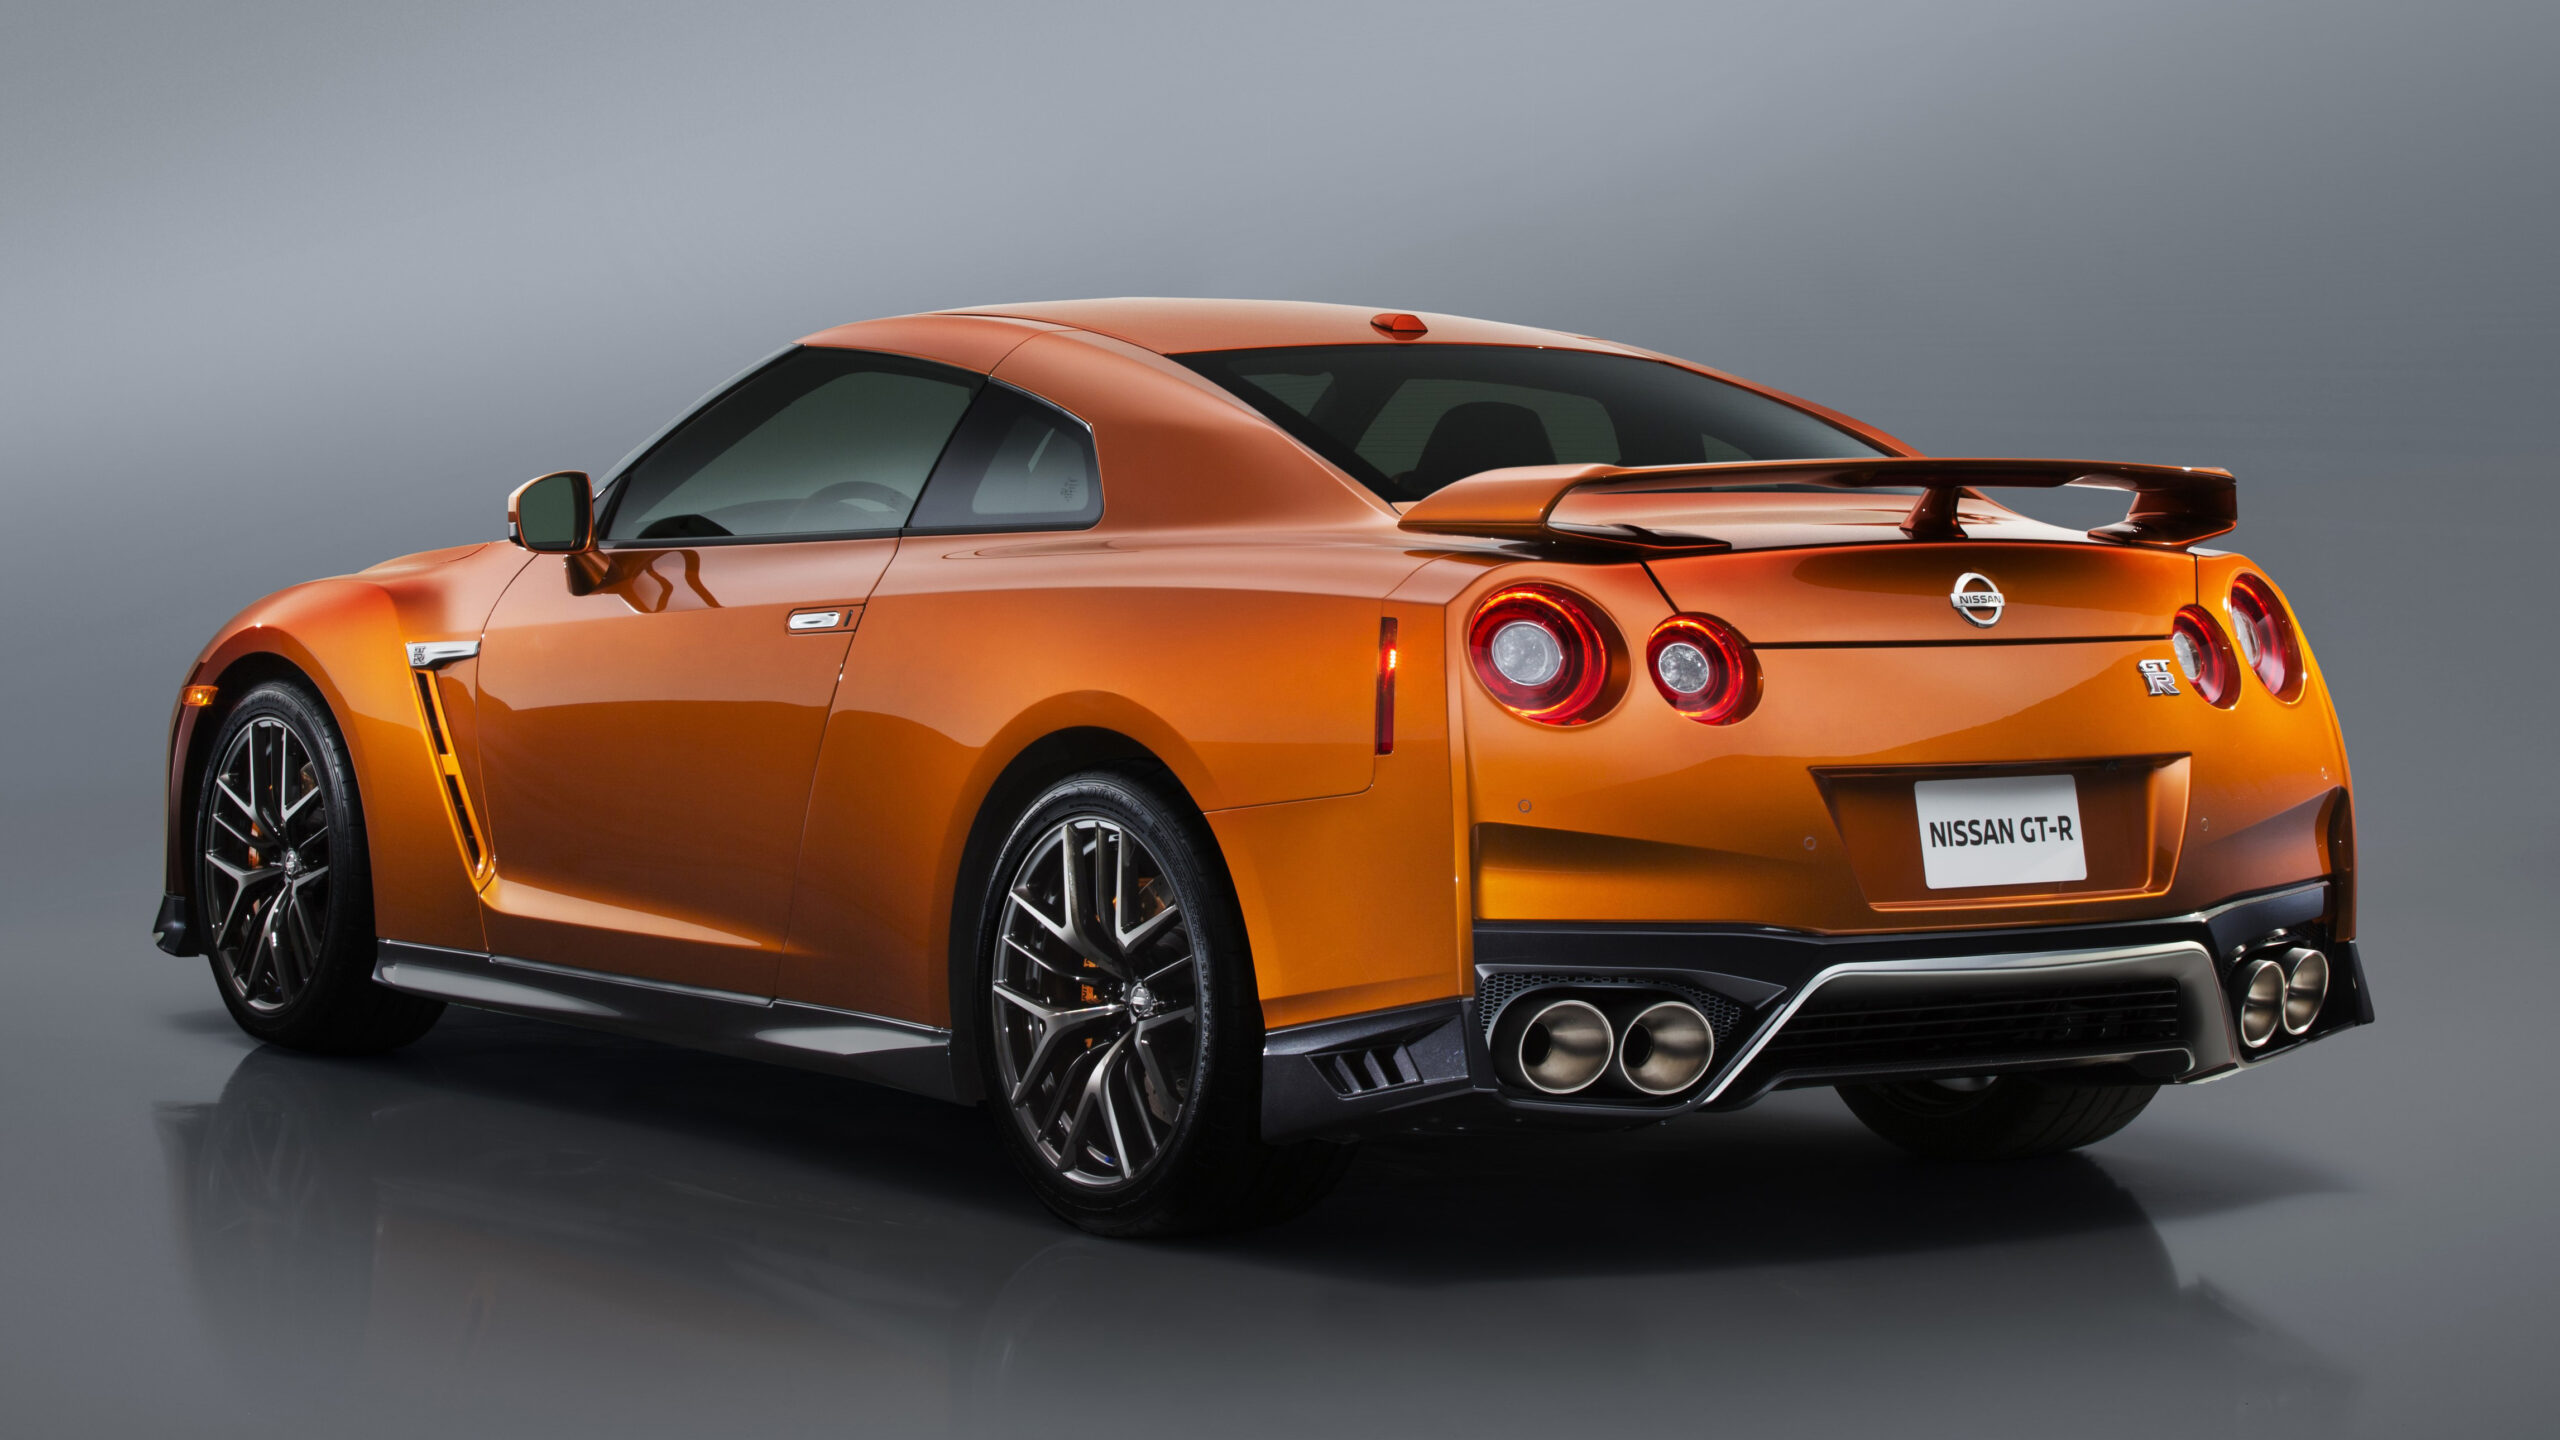 Nissan GT-R: A Legend of Performance and Innovation